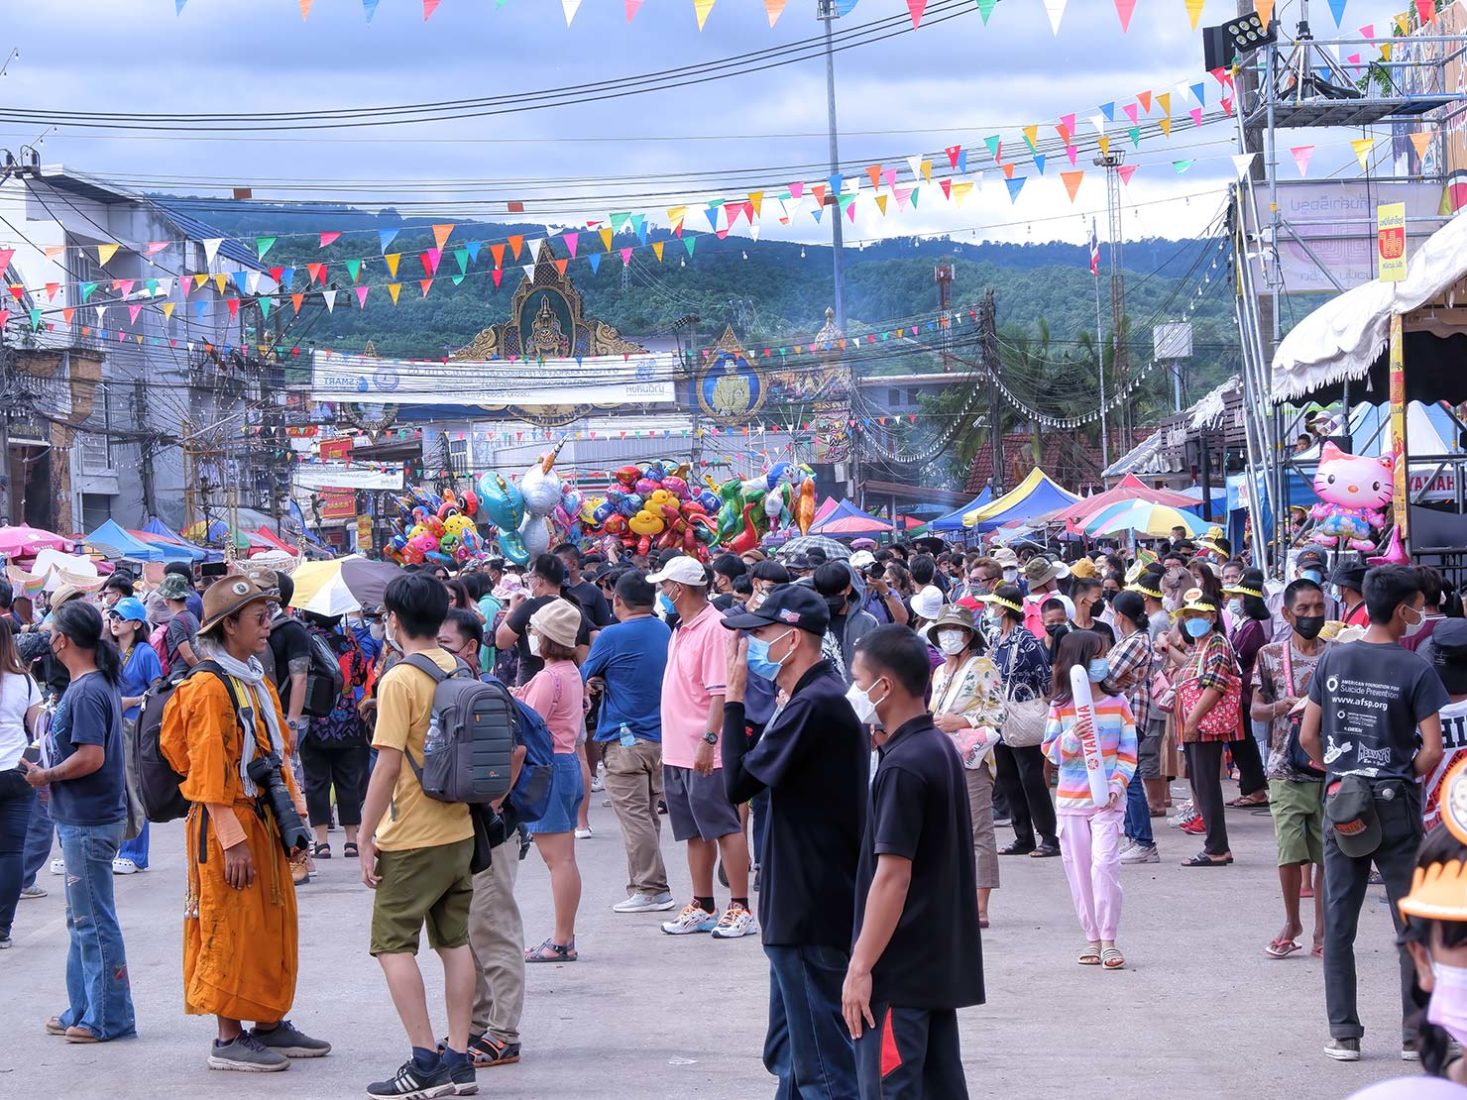 Following two years of cancelled events, thousands of onlookers flock to Dan Sai to witness this year's Phi ta Khon Festival